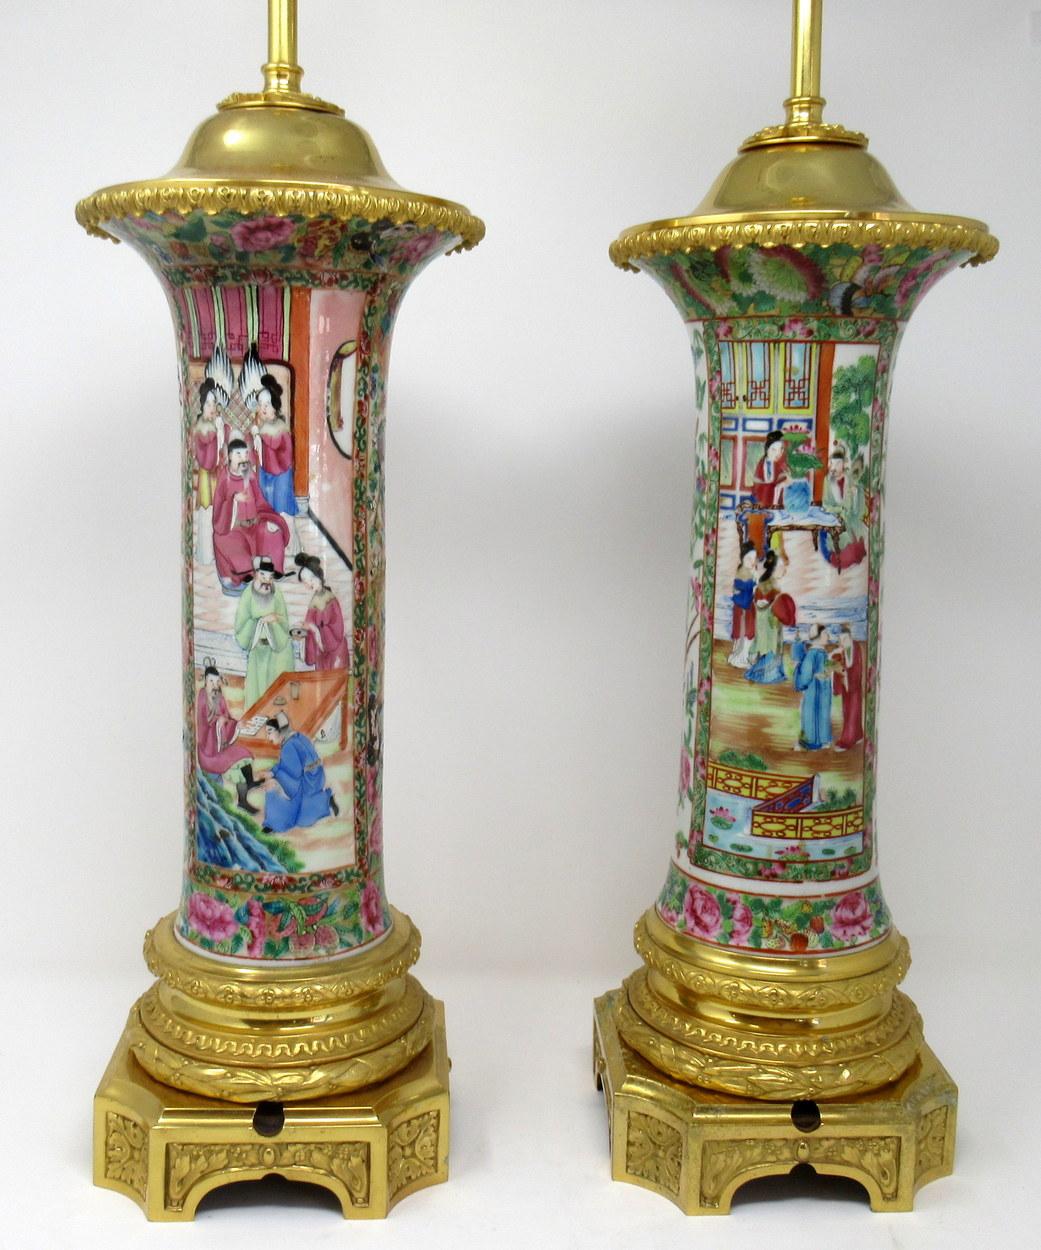 An exceptionally fine pair of Cantonese hand decorated porcelain oil lamps with ornate ormolu bases now converted to electric table lamps, of large proportions, mid-19th century. 

The main outer bodies of bulbous form with hand painted panels in